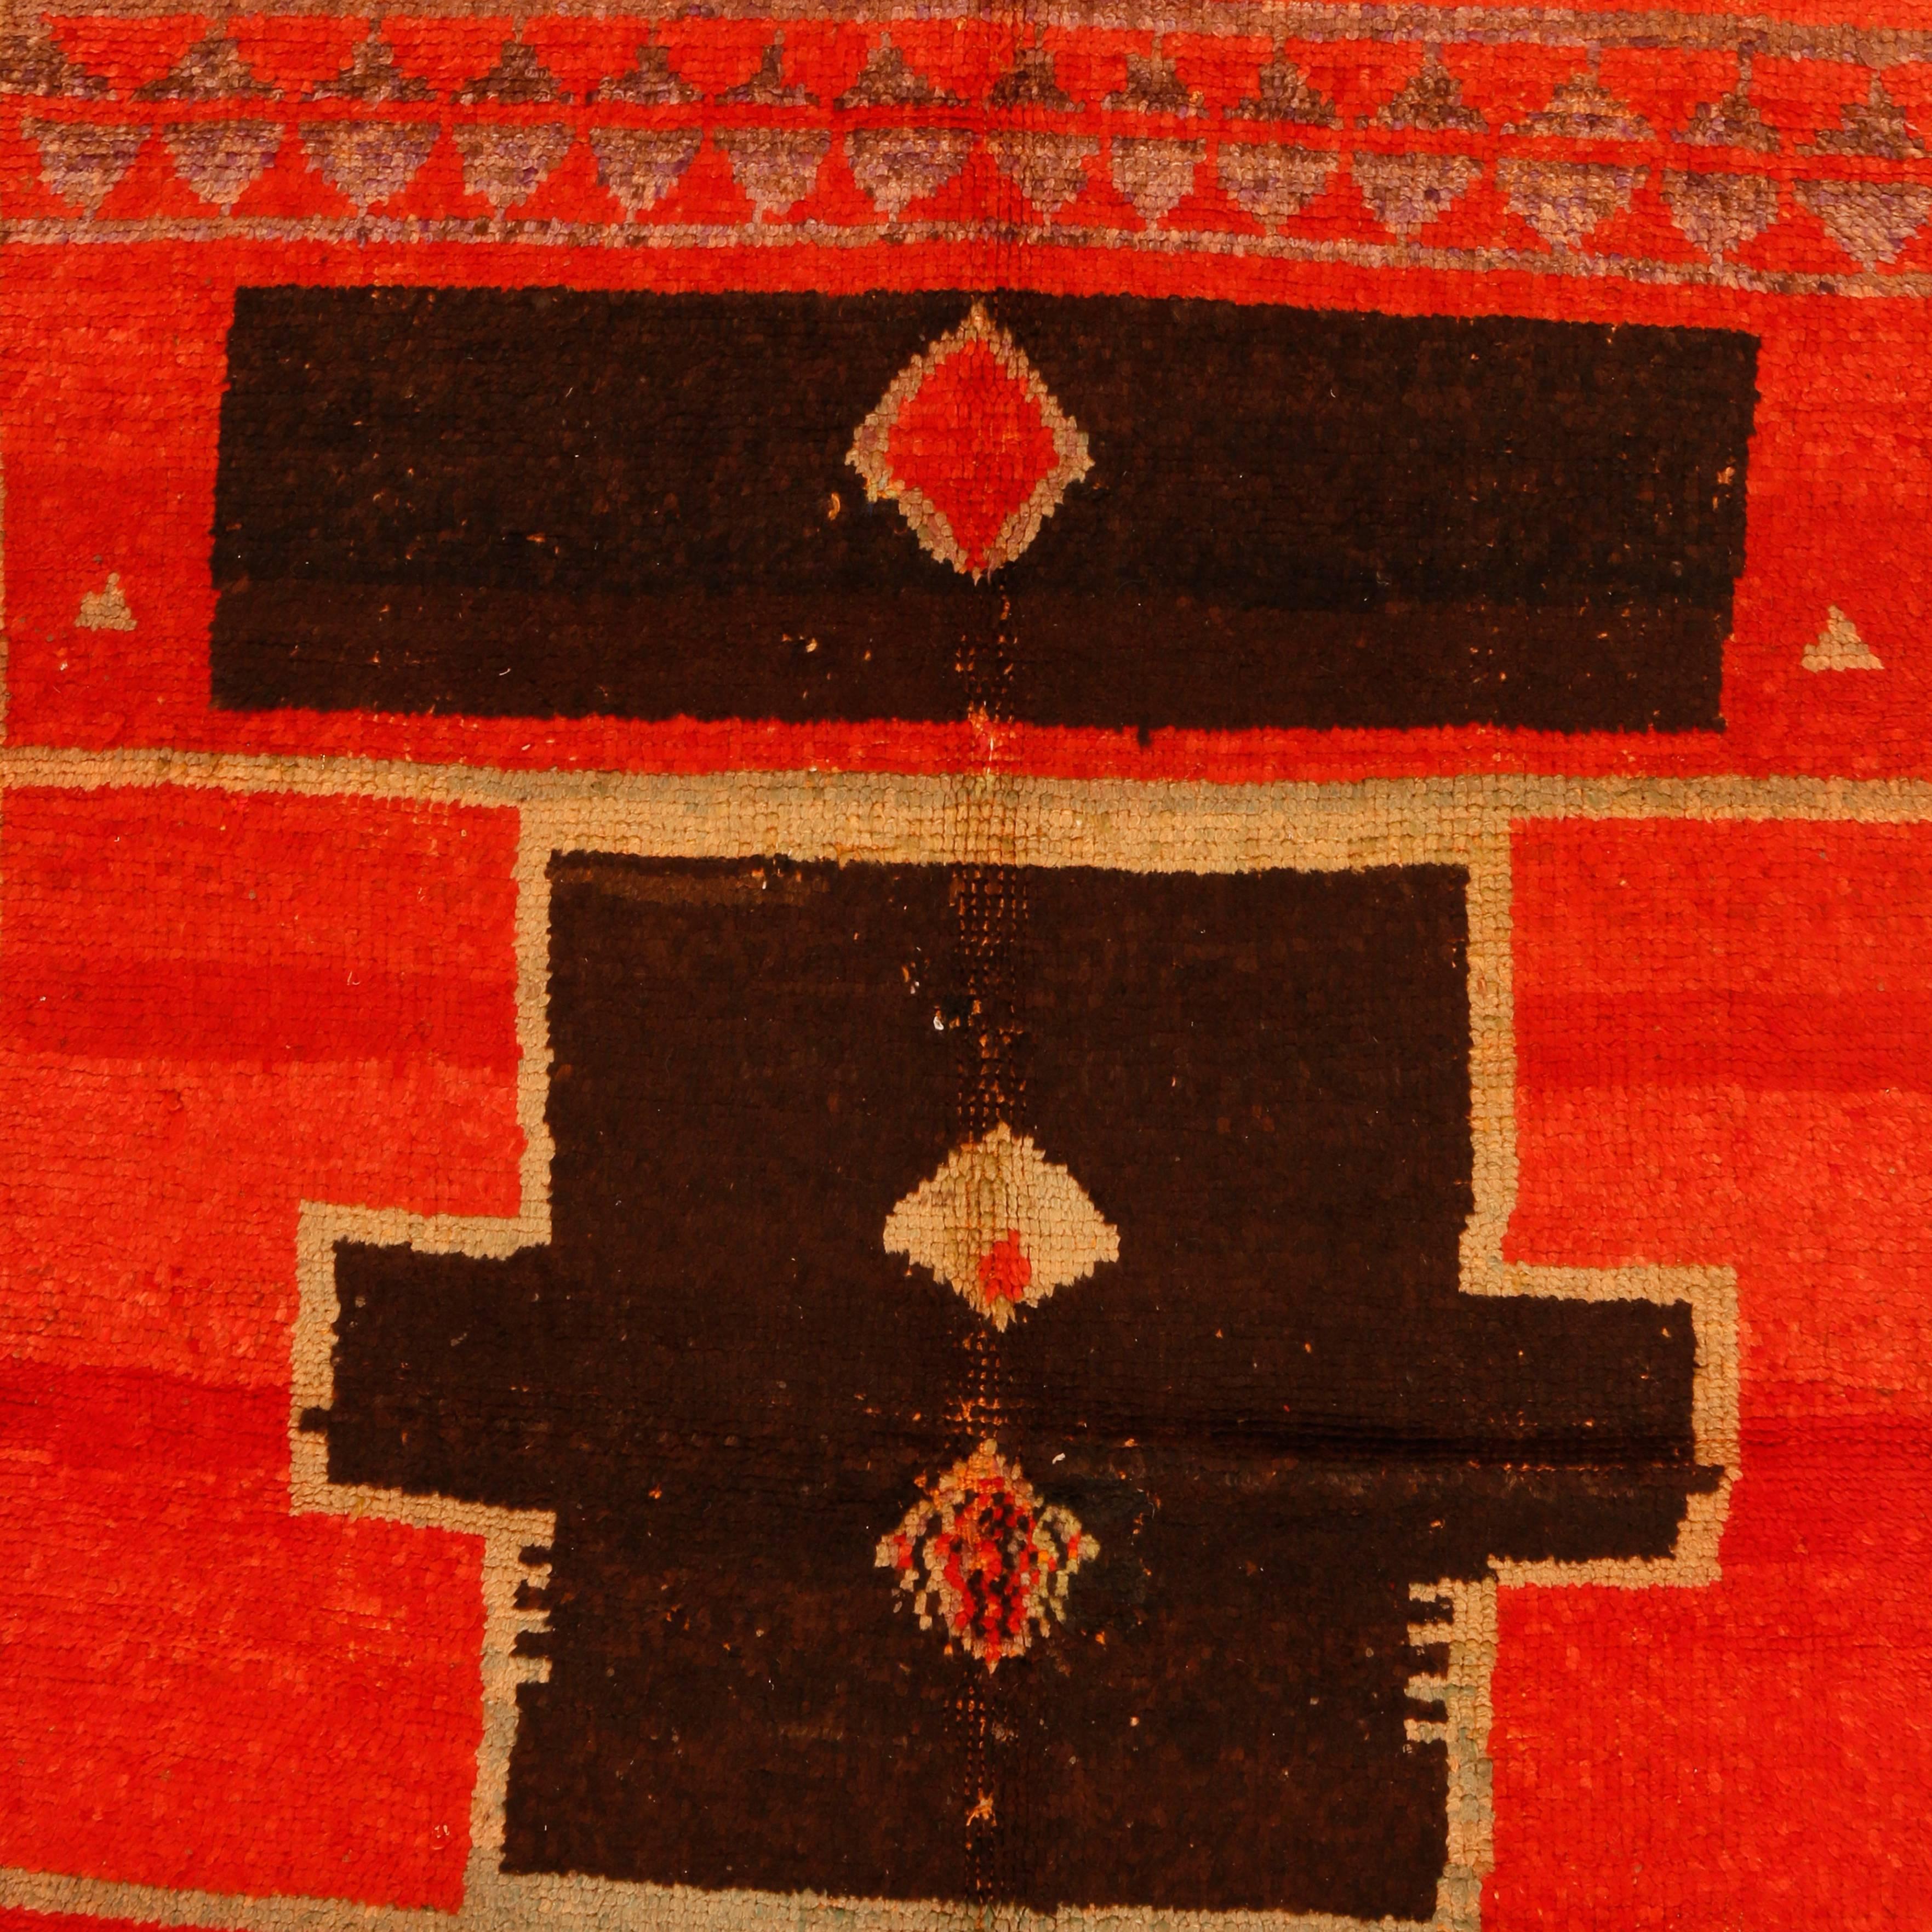 The Berber rugs from the the High Atlas region are often distinguished by an iconography that relates them to more 'classical' tribal rugs, such as those of Anatolia and the Caucasus. This early example from the Taroudant area displays a cruciform